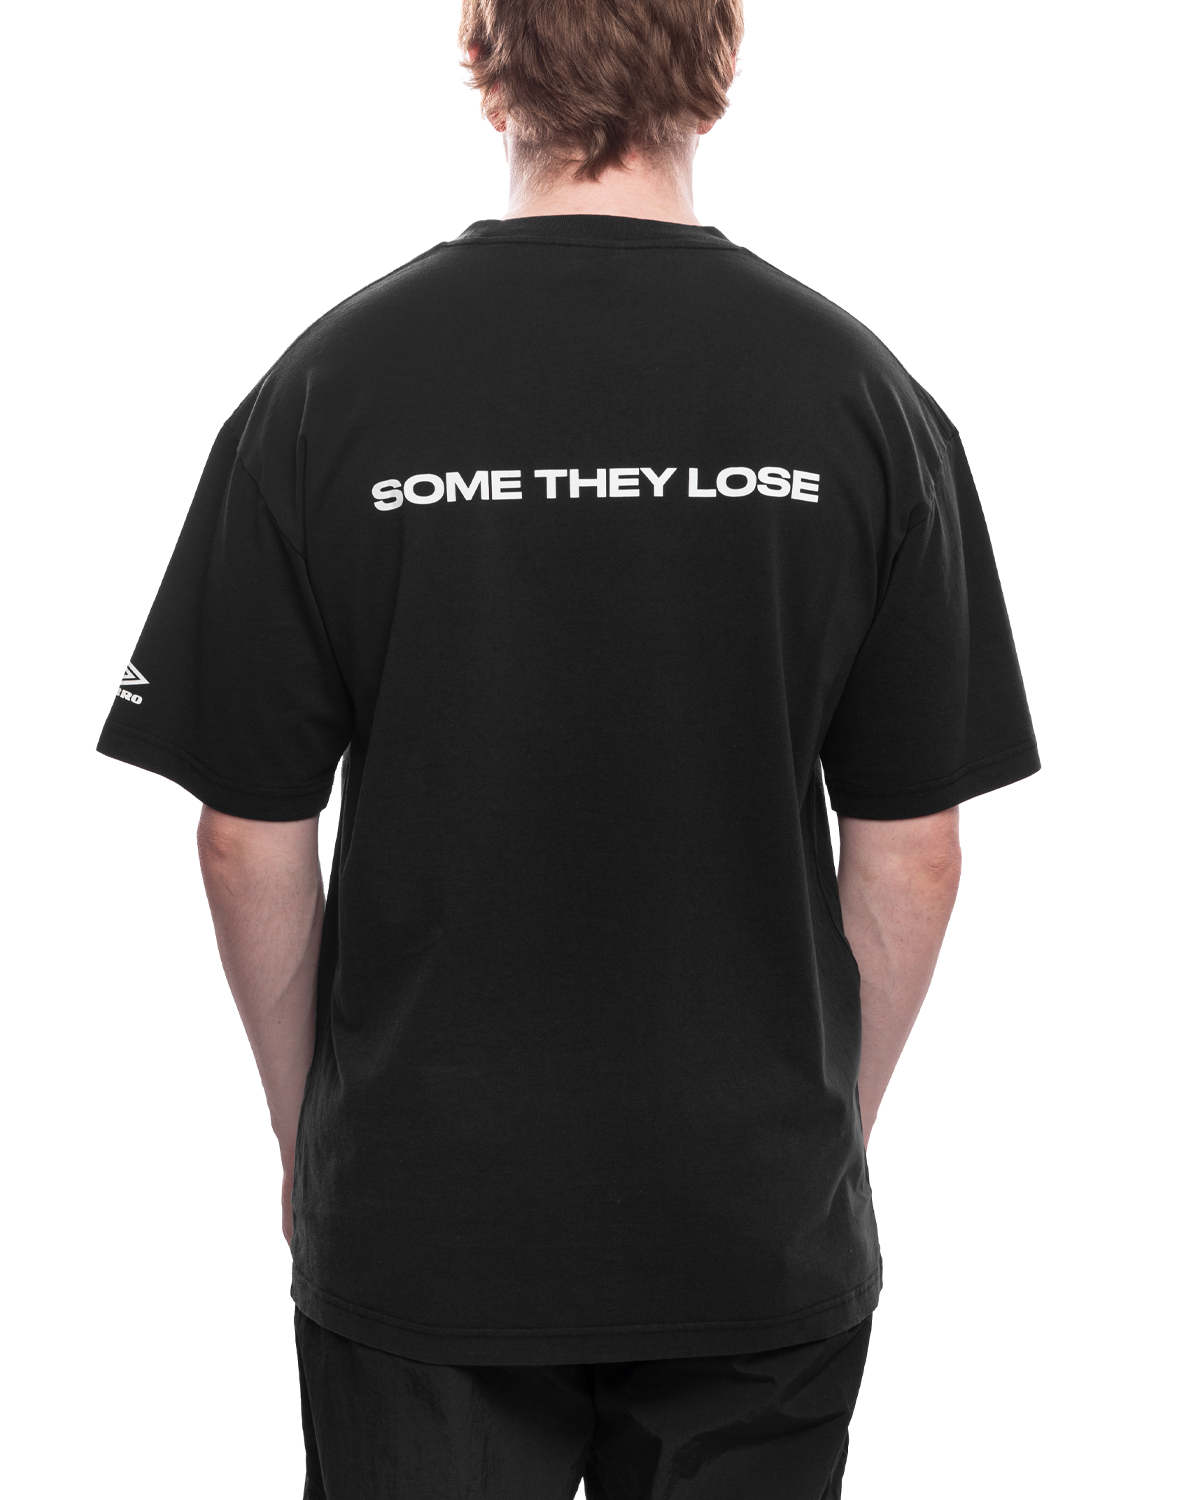 Some They Win Tee Black